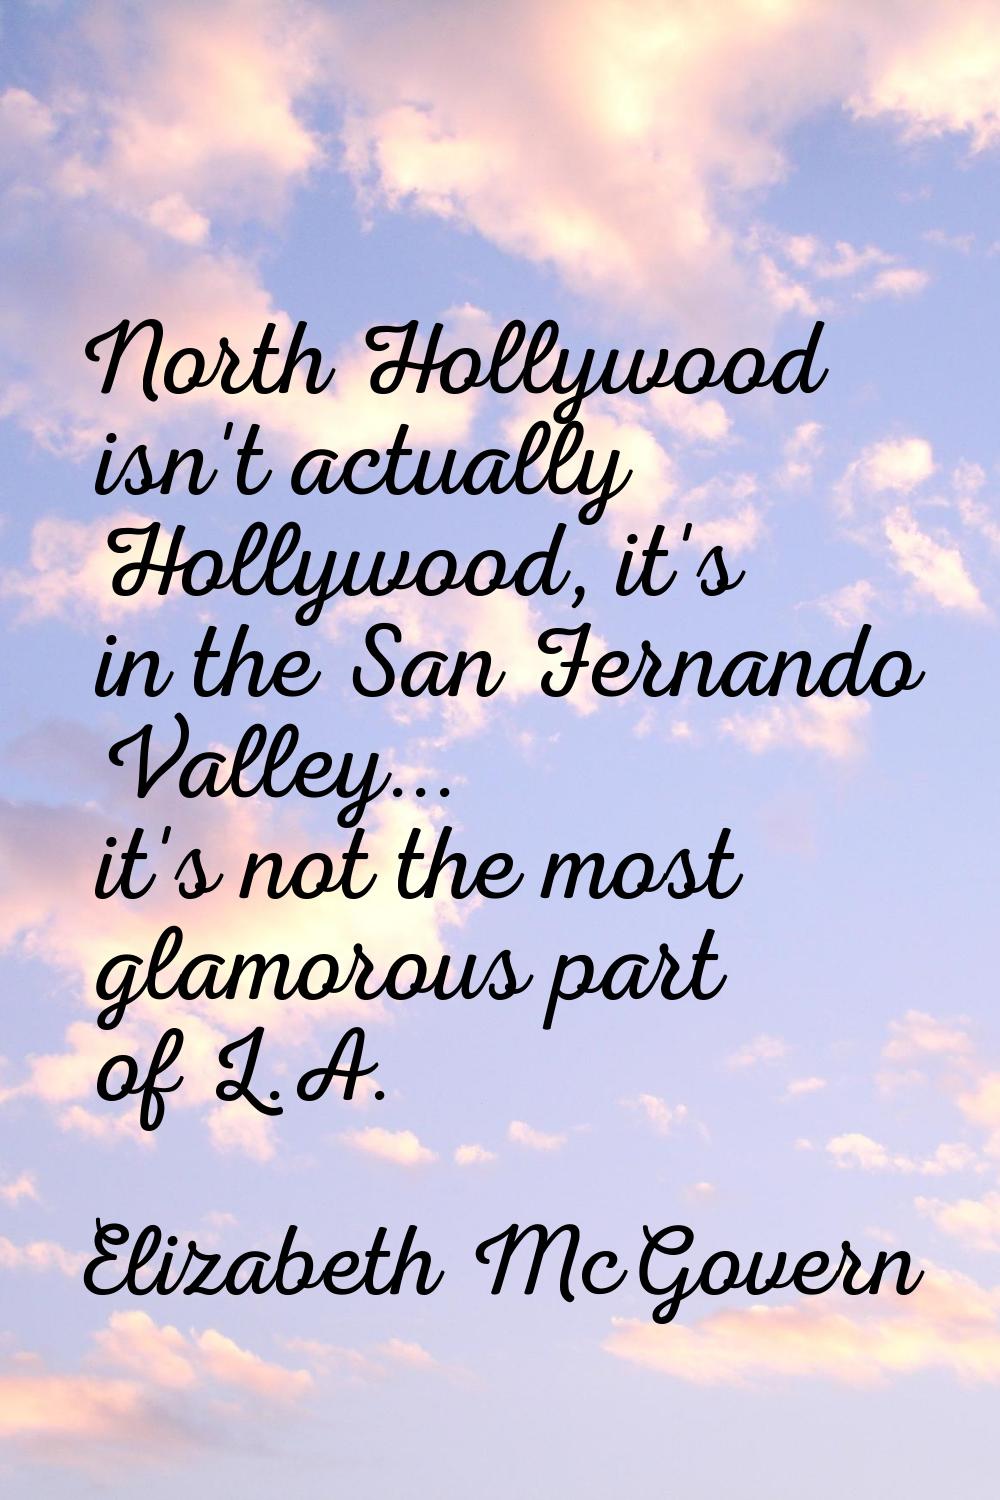 North Hollywood isn't actually Hollywood, it's in the San Fernando Valley... it's not the most glam